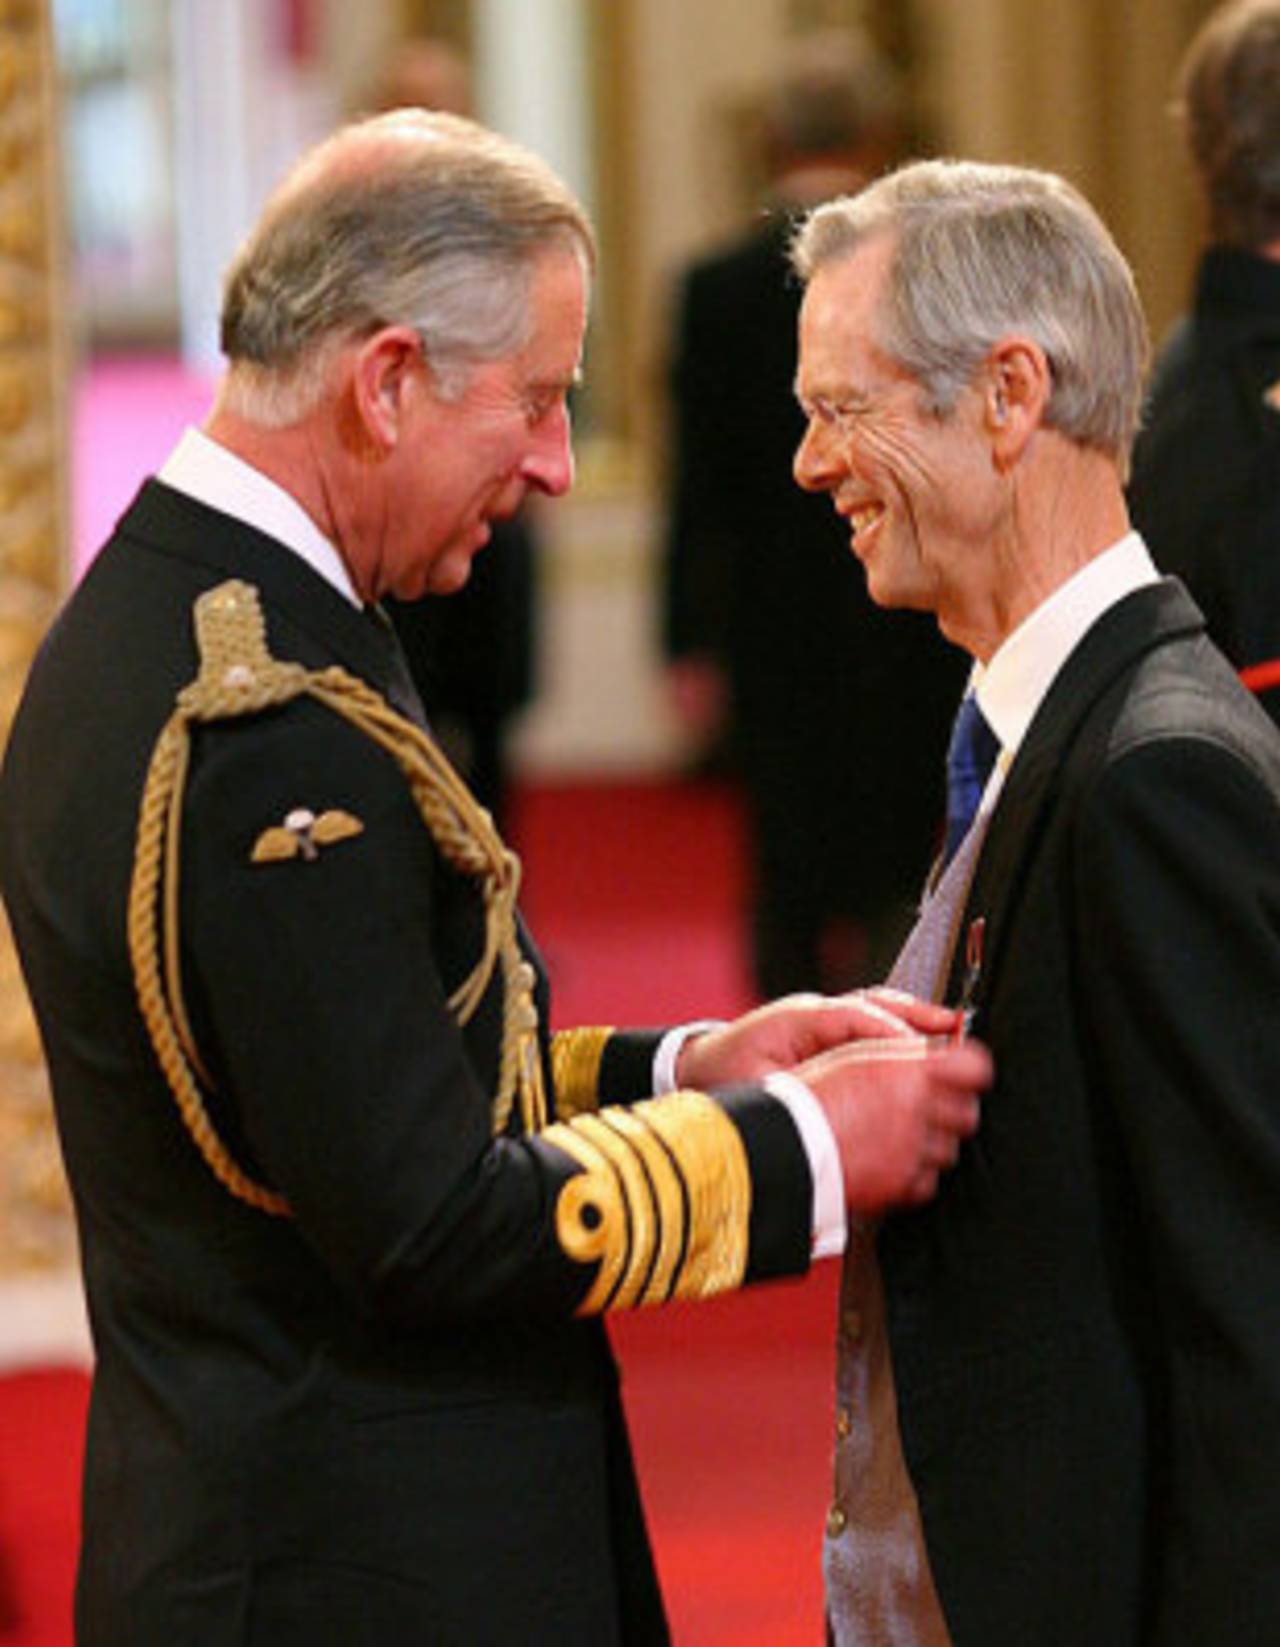 Broadcaster and journalist Christopher Martin-Jenkins receives his MBE from Prince Charles, London, May 28, 2009 